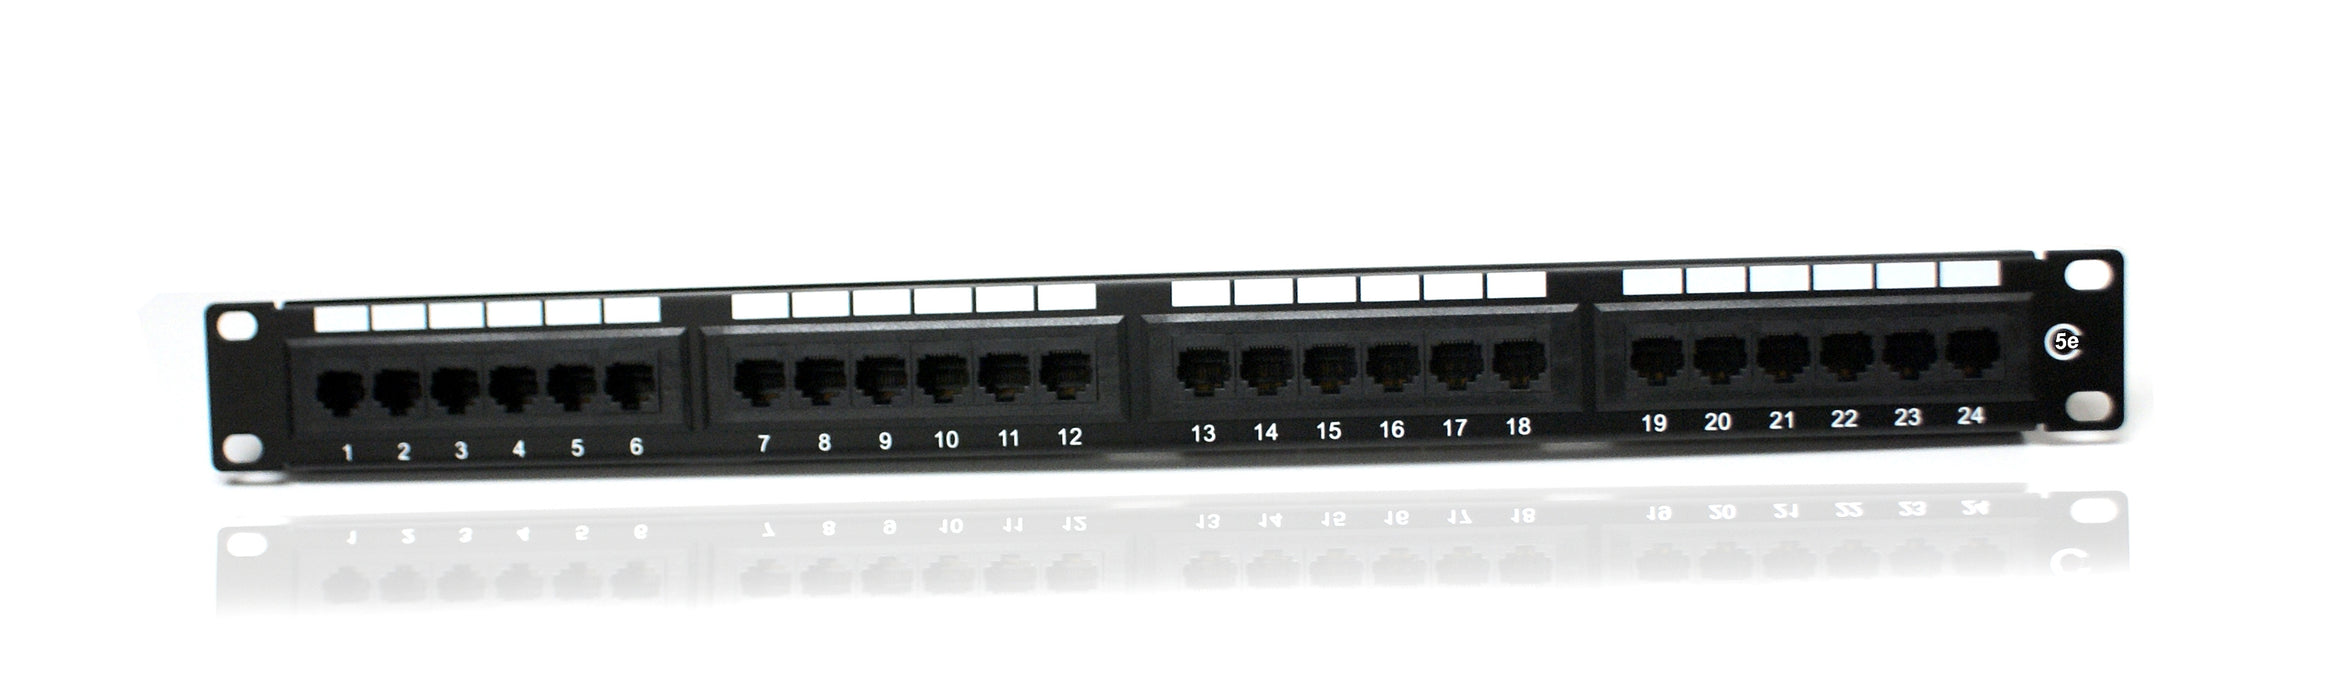 Dynamode 24 Port CAT 5 Patch Panel For 19" Cabinet - Dual Use - NET-DY-PP24/CT5